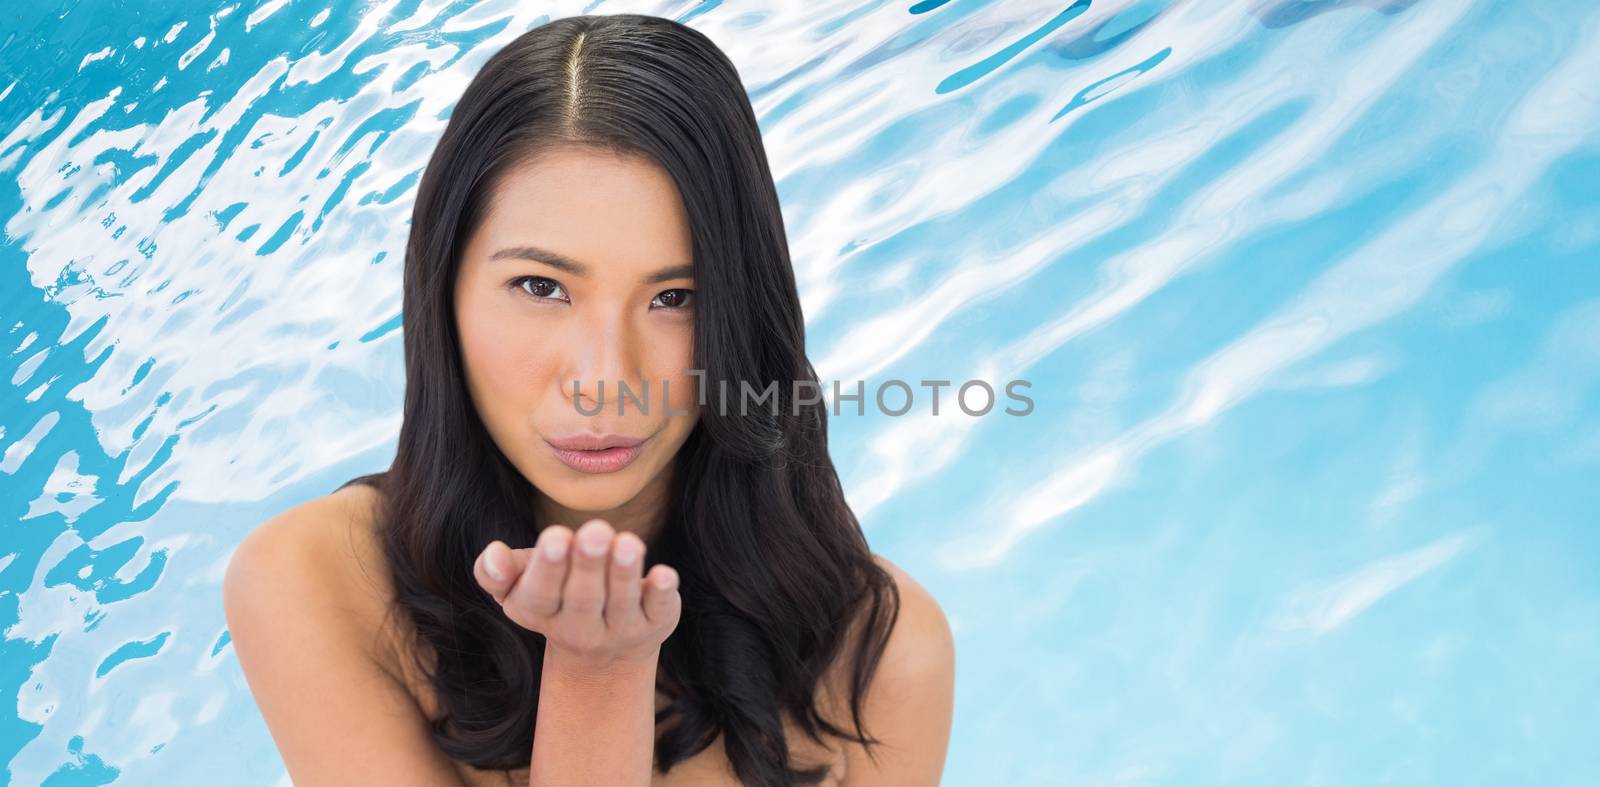 Nude sensual dark haired model sending a kiss to camera against ripples on blue swimming pool